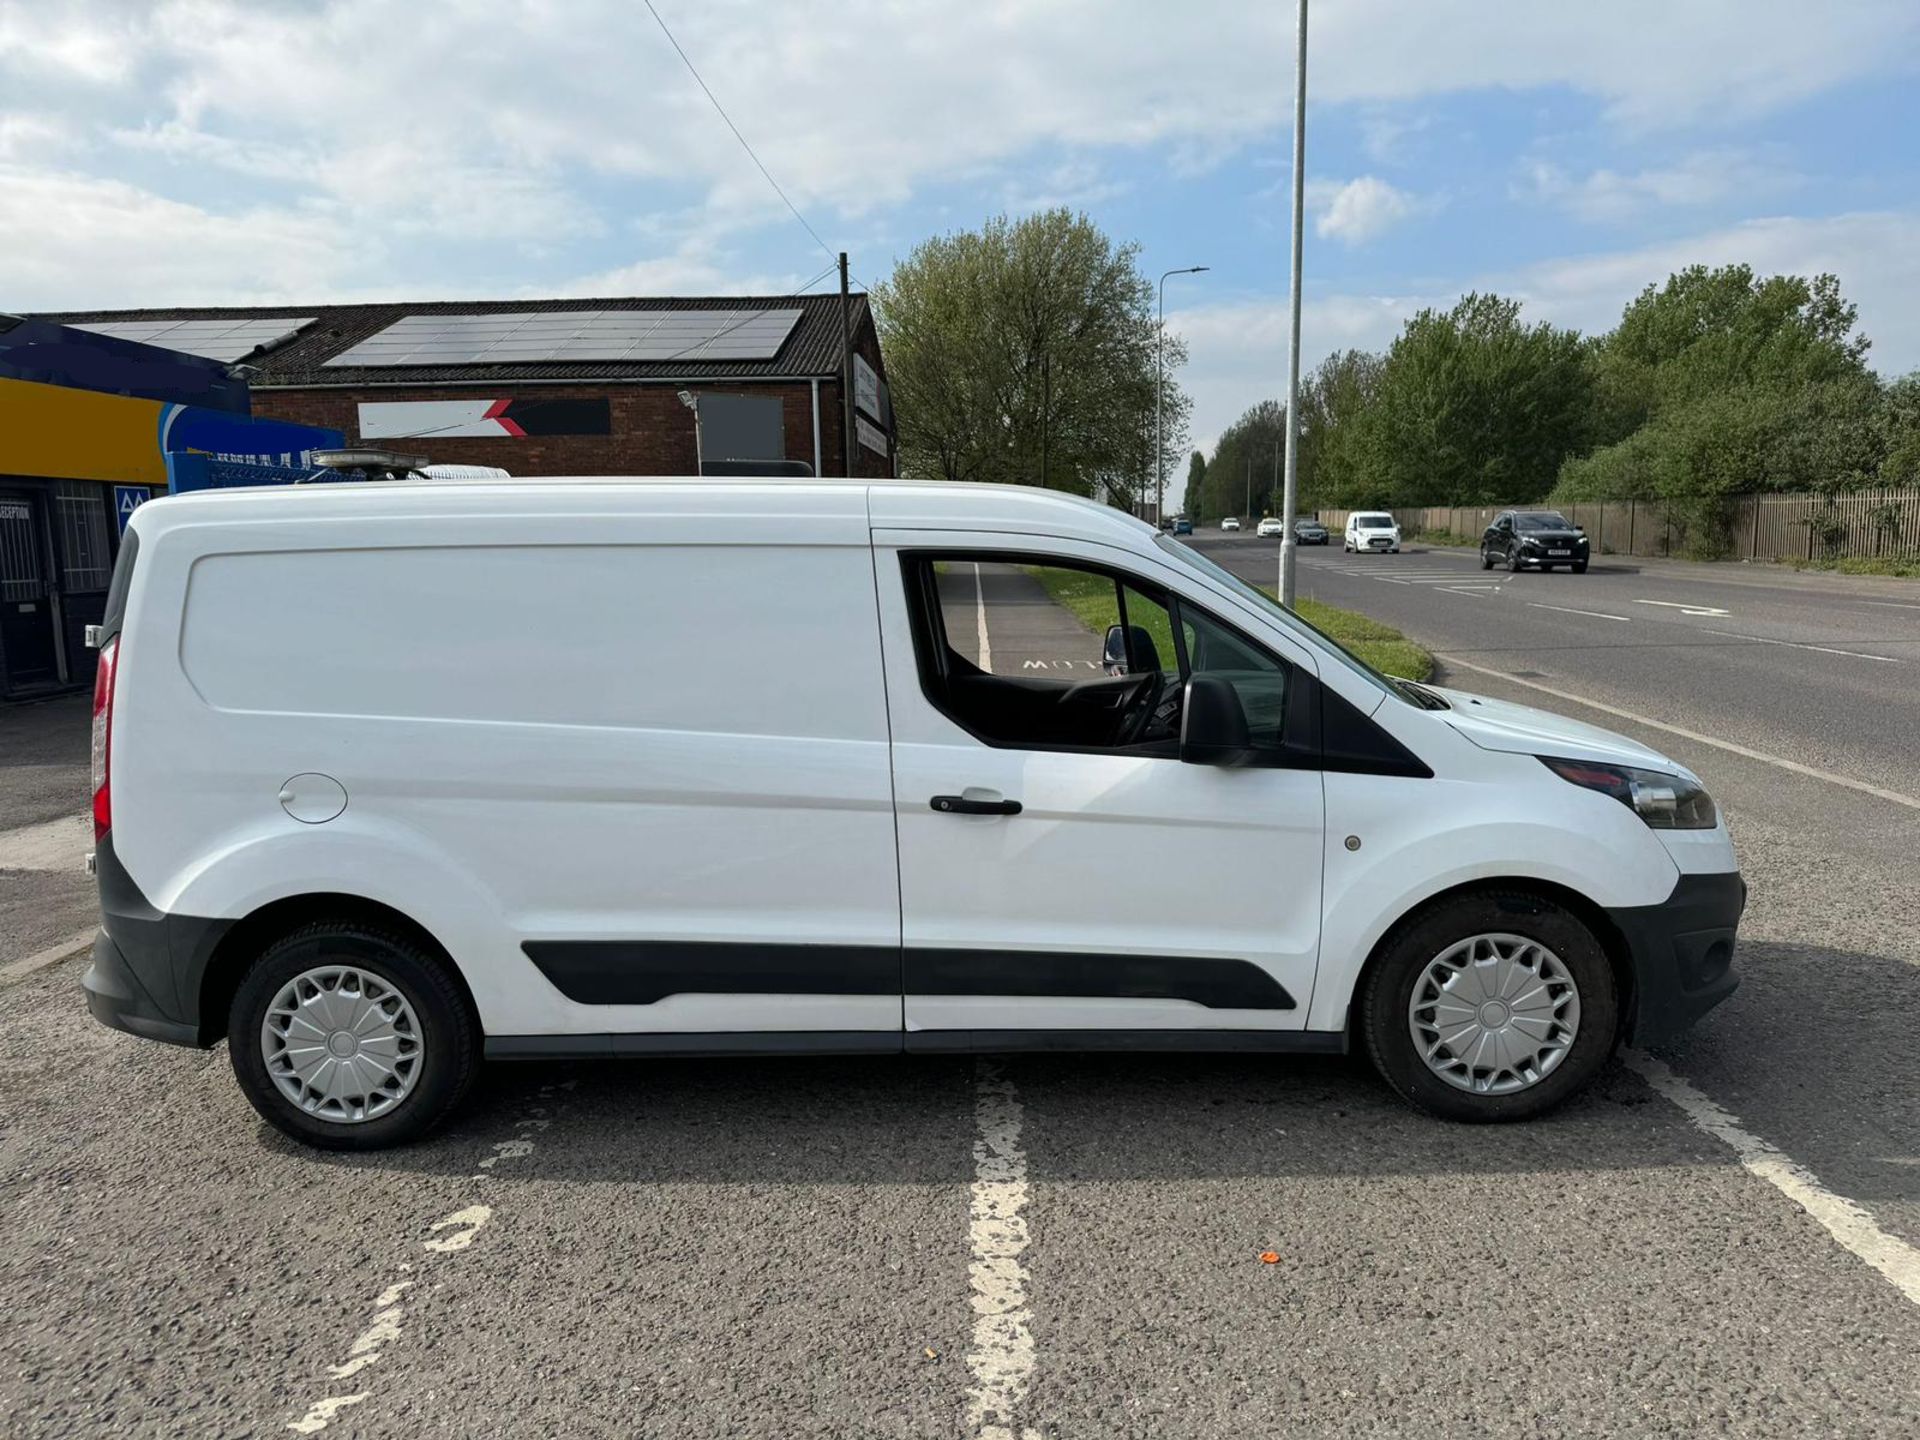 2016 66 FORD TRANSIT CONNECT LWB PANEL VAN - 123K MILES - AIR CON - Image 4 of 6